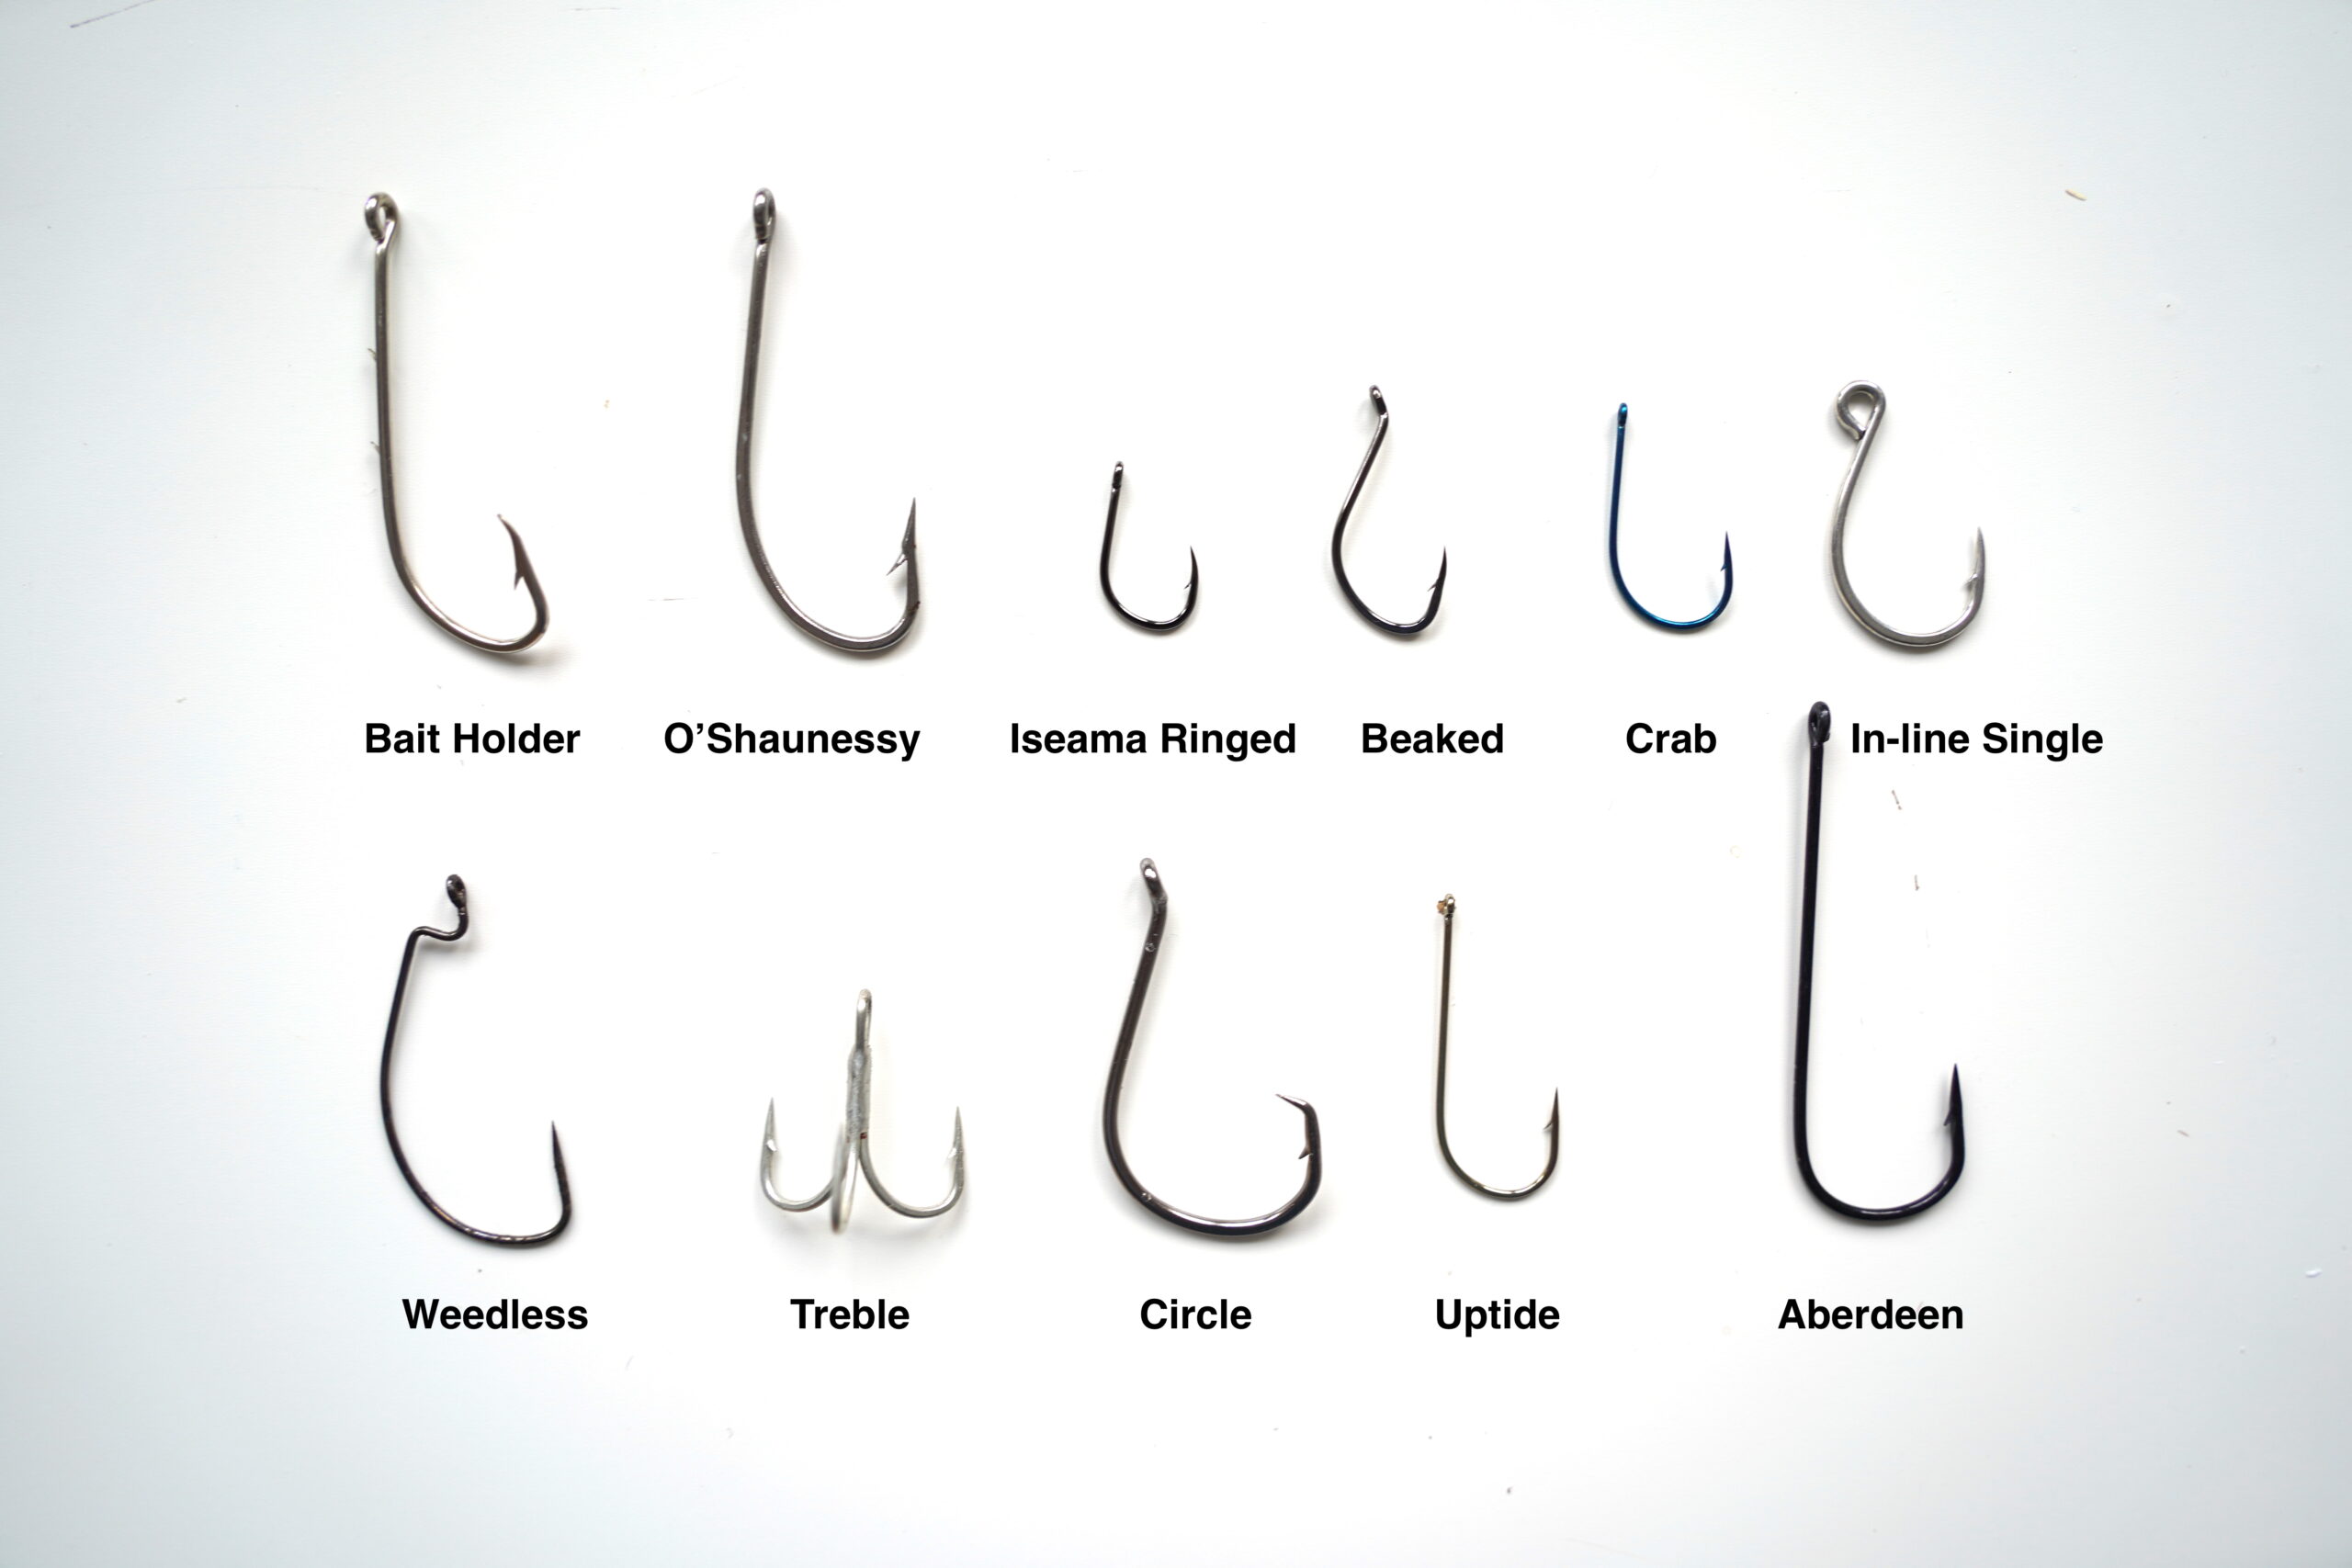 Your Guide to Fishing Hook Sizes